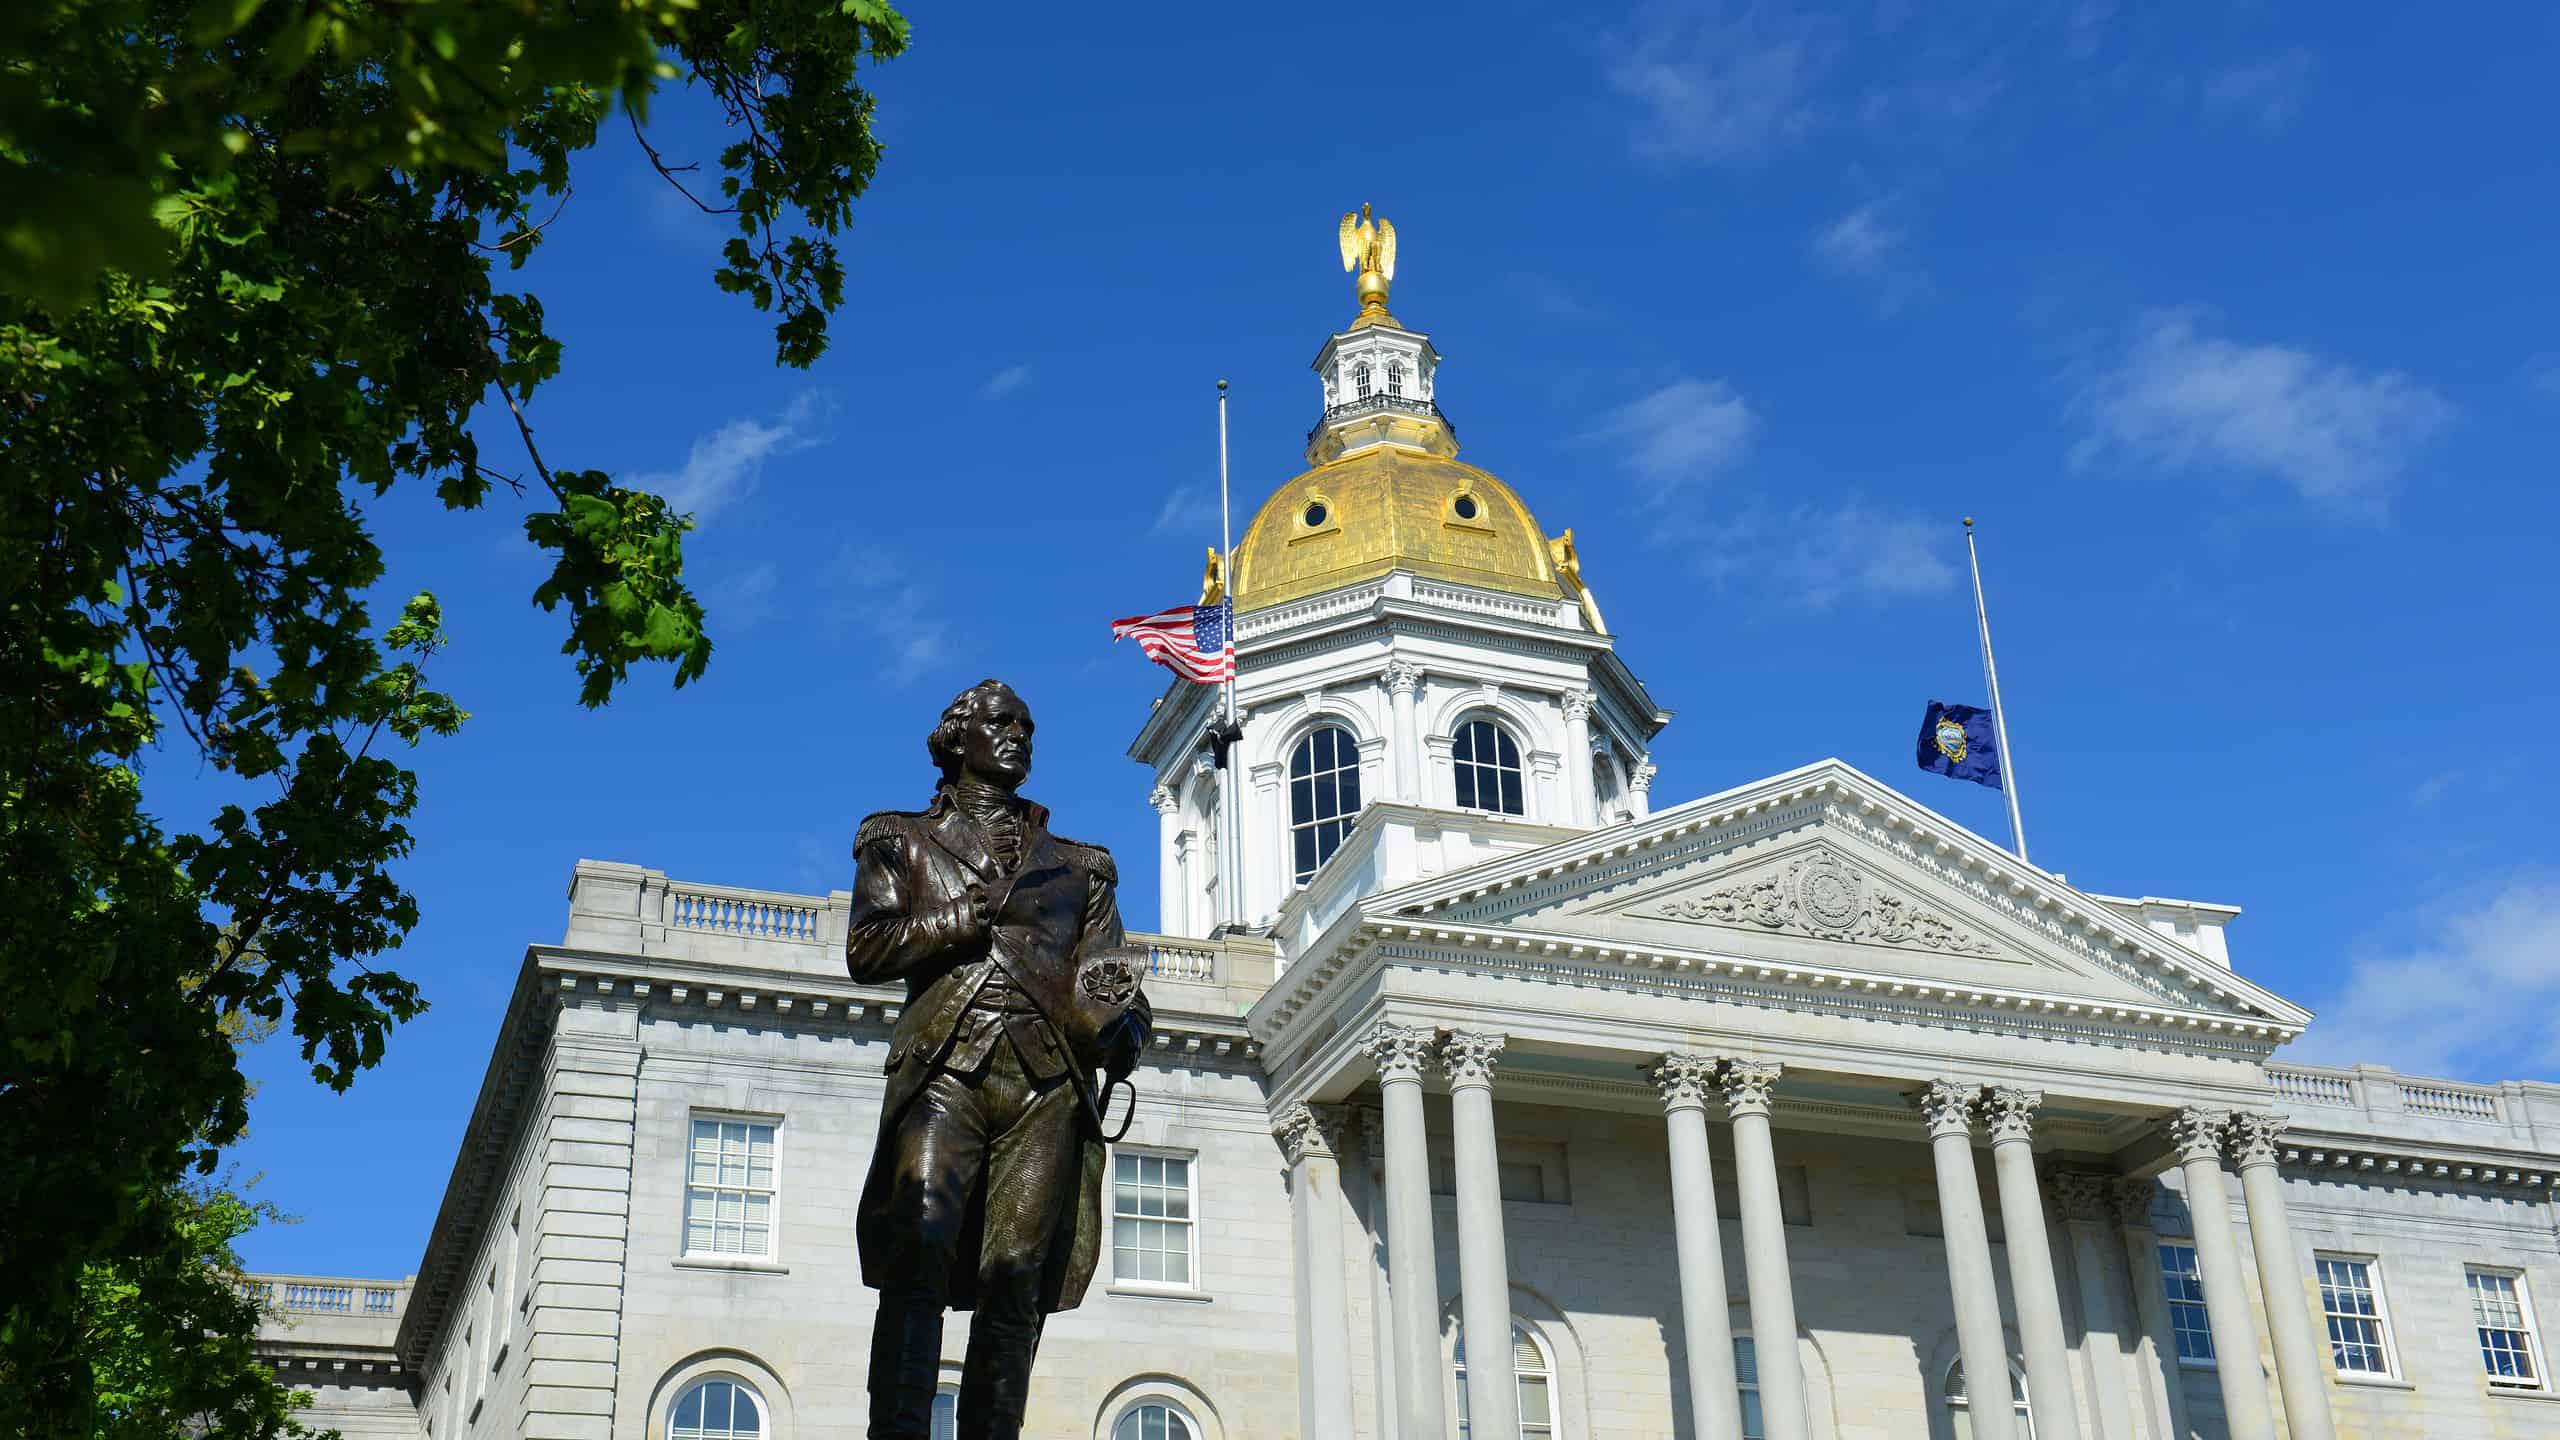 New Hampshire State House, Concord, New Hampshire, USA. New Hampshire State House is the nation's oldest state house, built in 1816 - 1819.